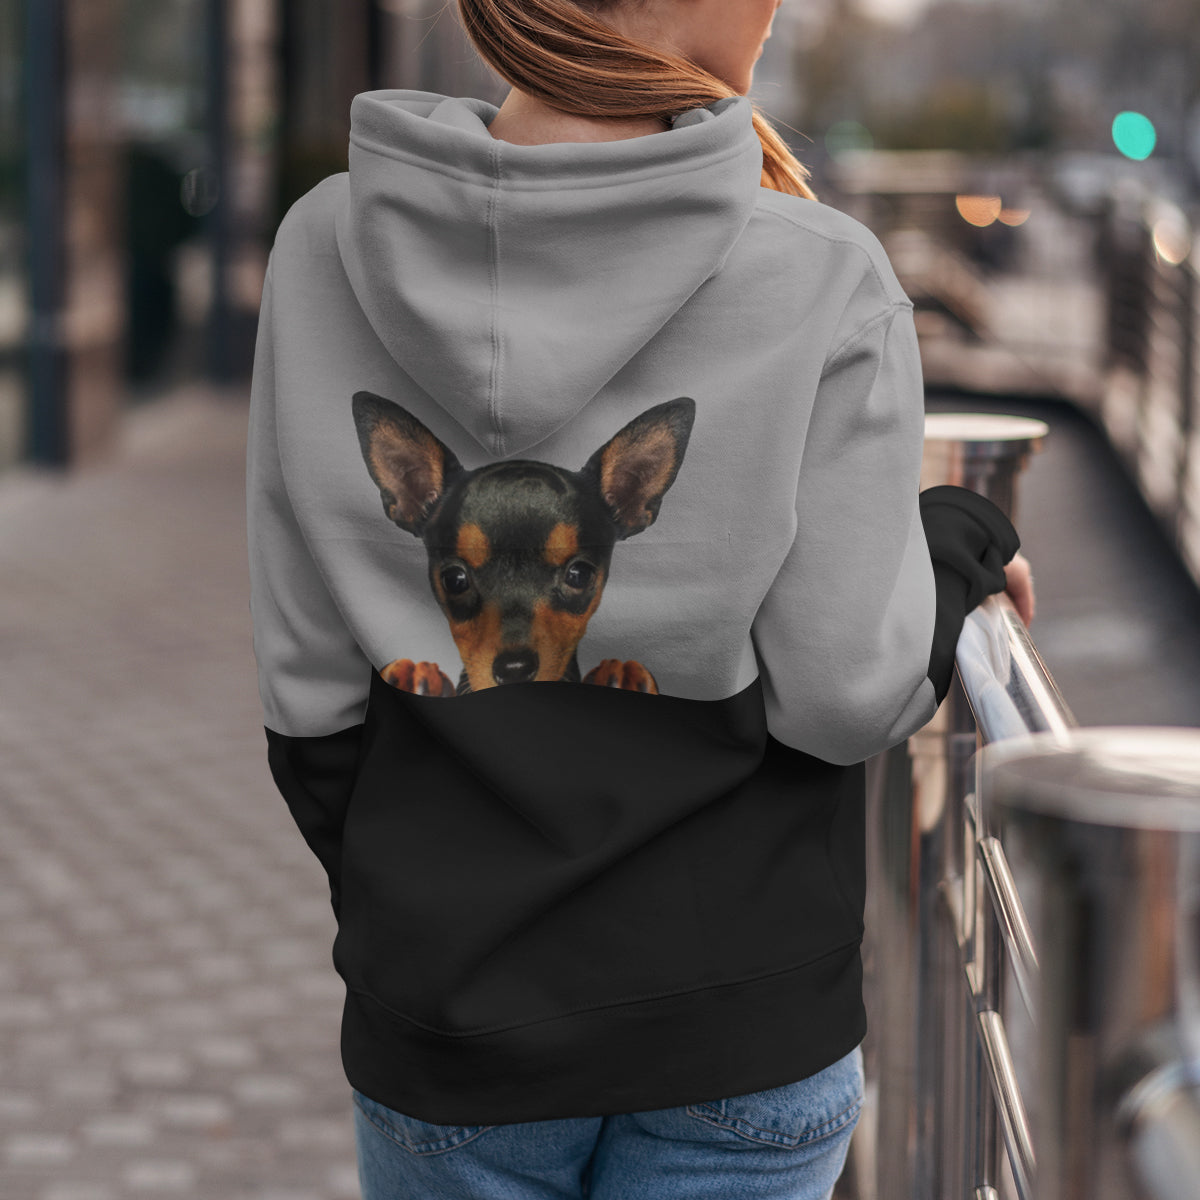 Can You See Me - Miniature Pinscher Hoodie V2